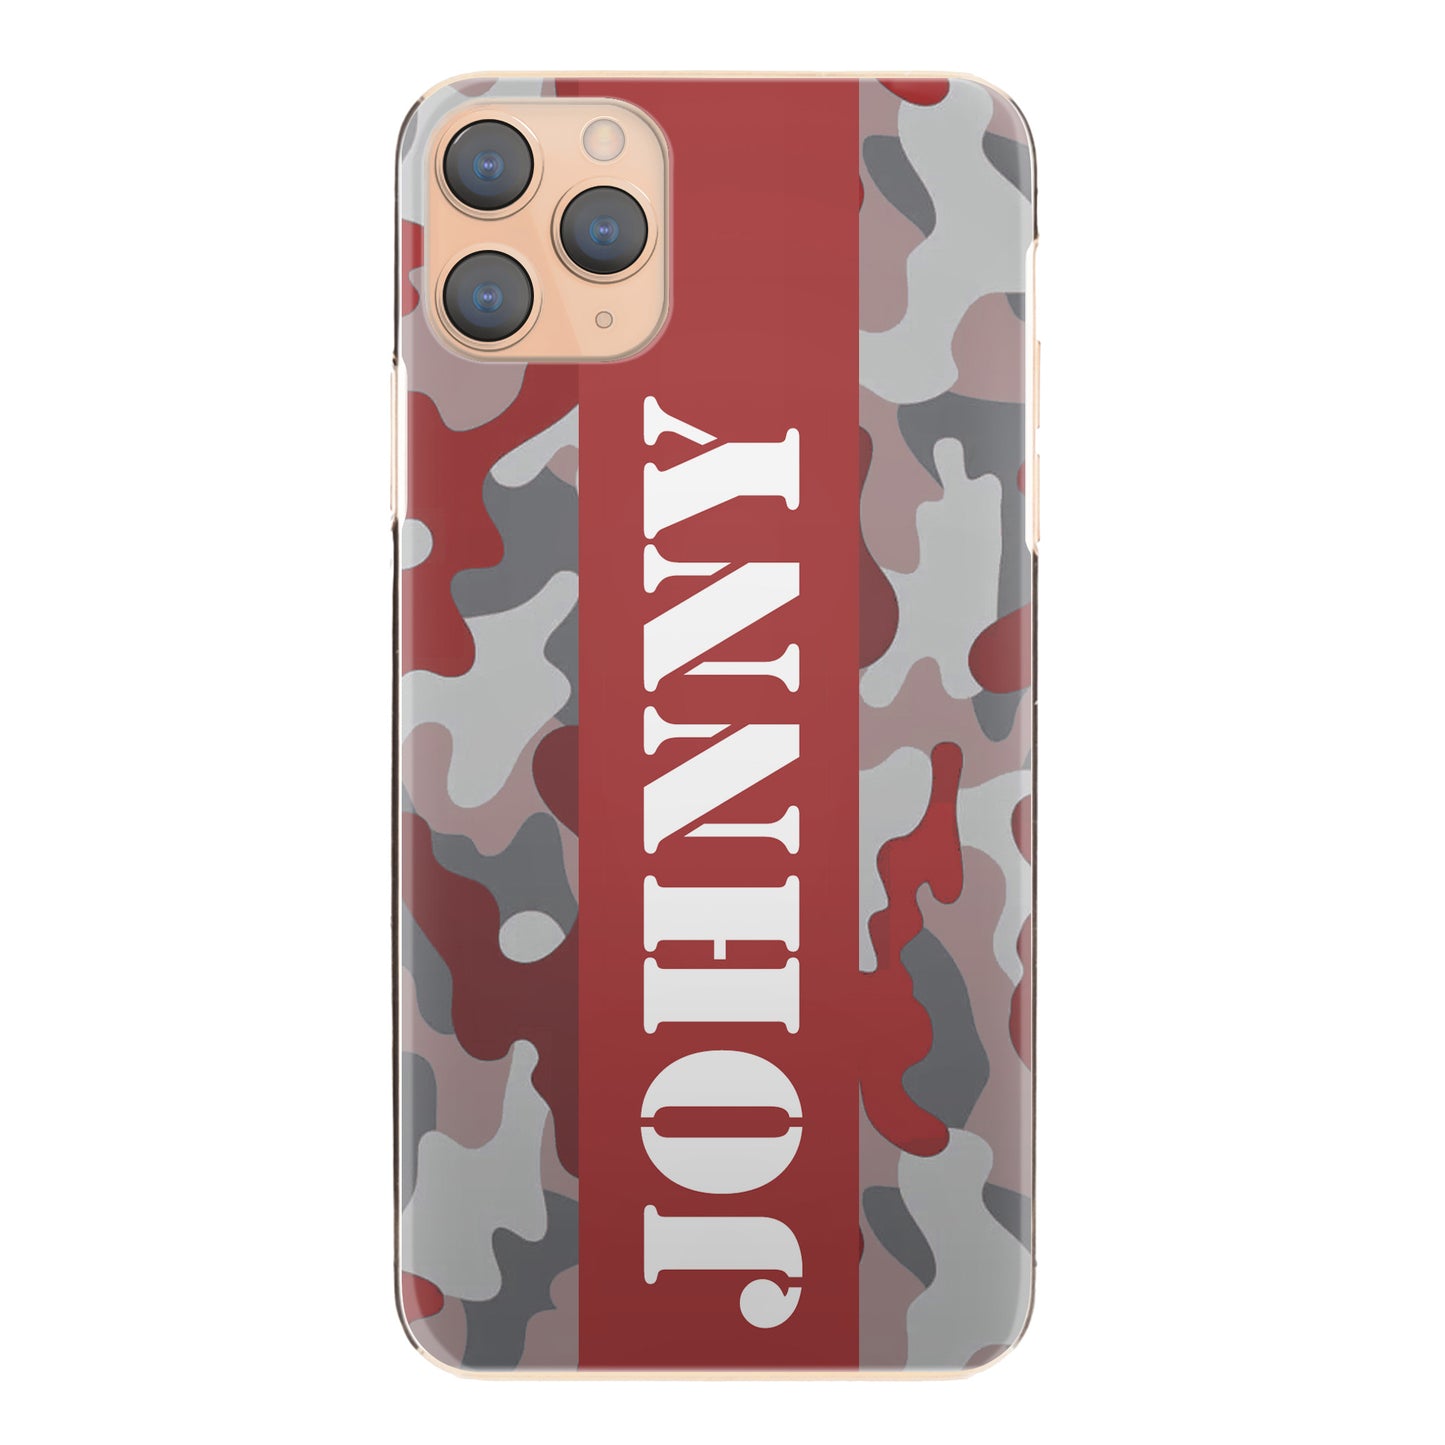 Personalised Xiaomi Phone Hard Case with Military Text on Red Camo